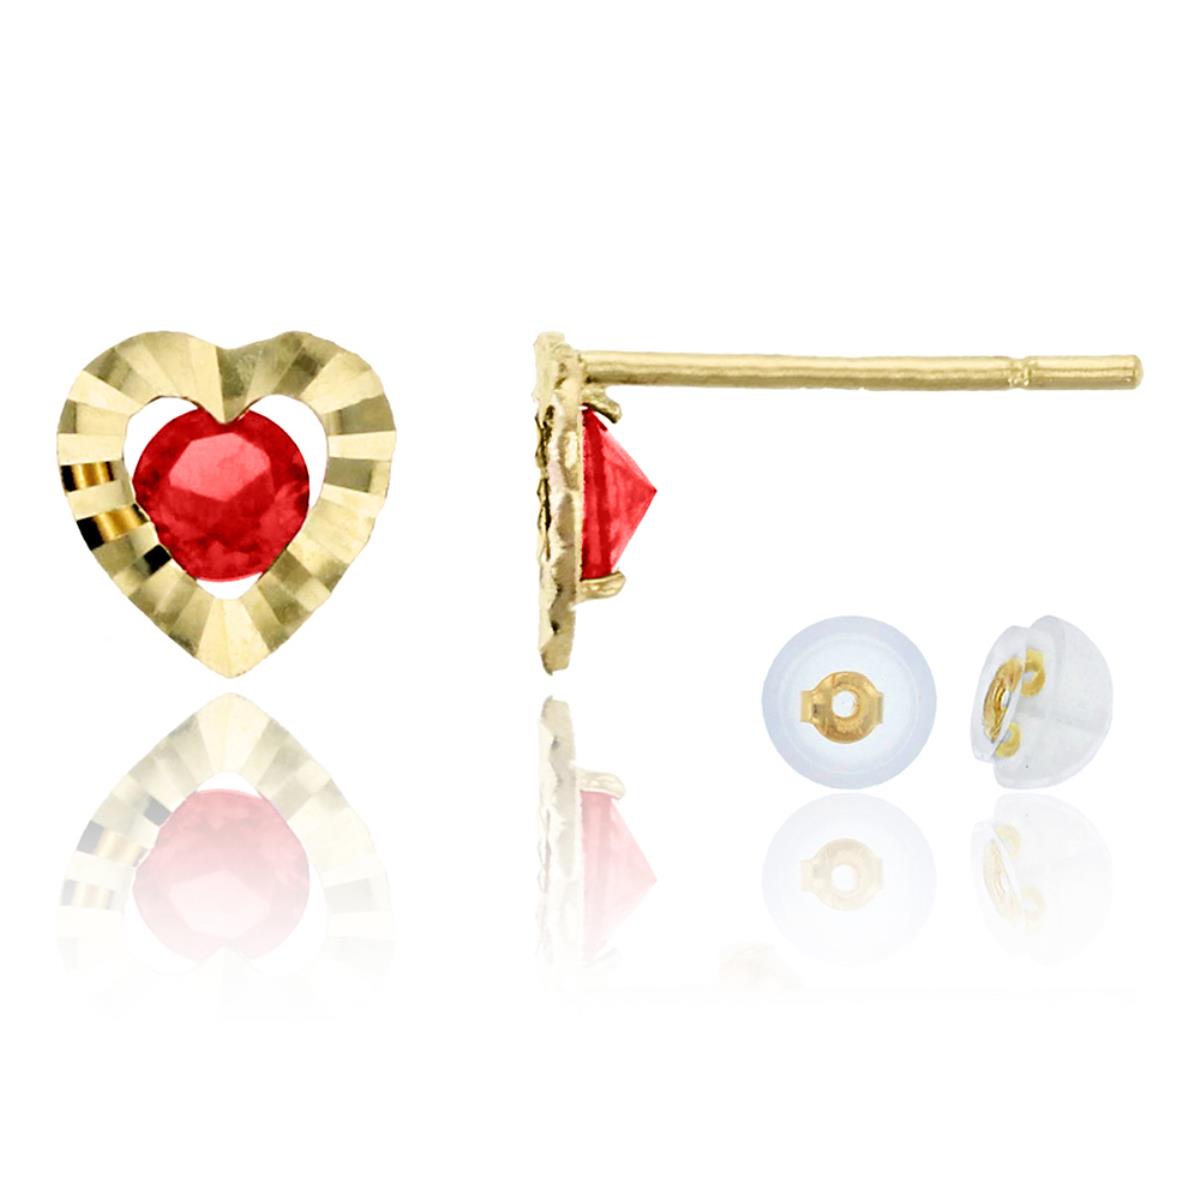 10K Yellow Gold DC Red Ruby CZ Heart Stud Earring & 10K Silicone Back